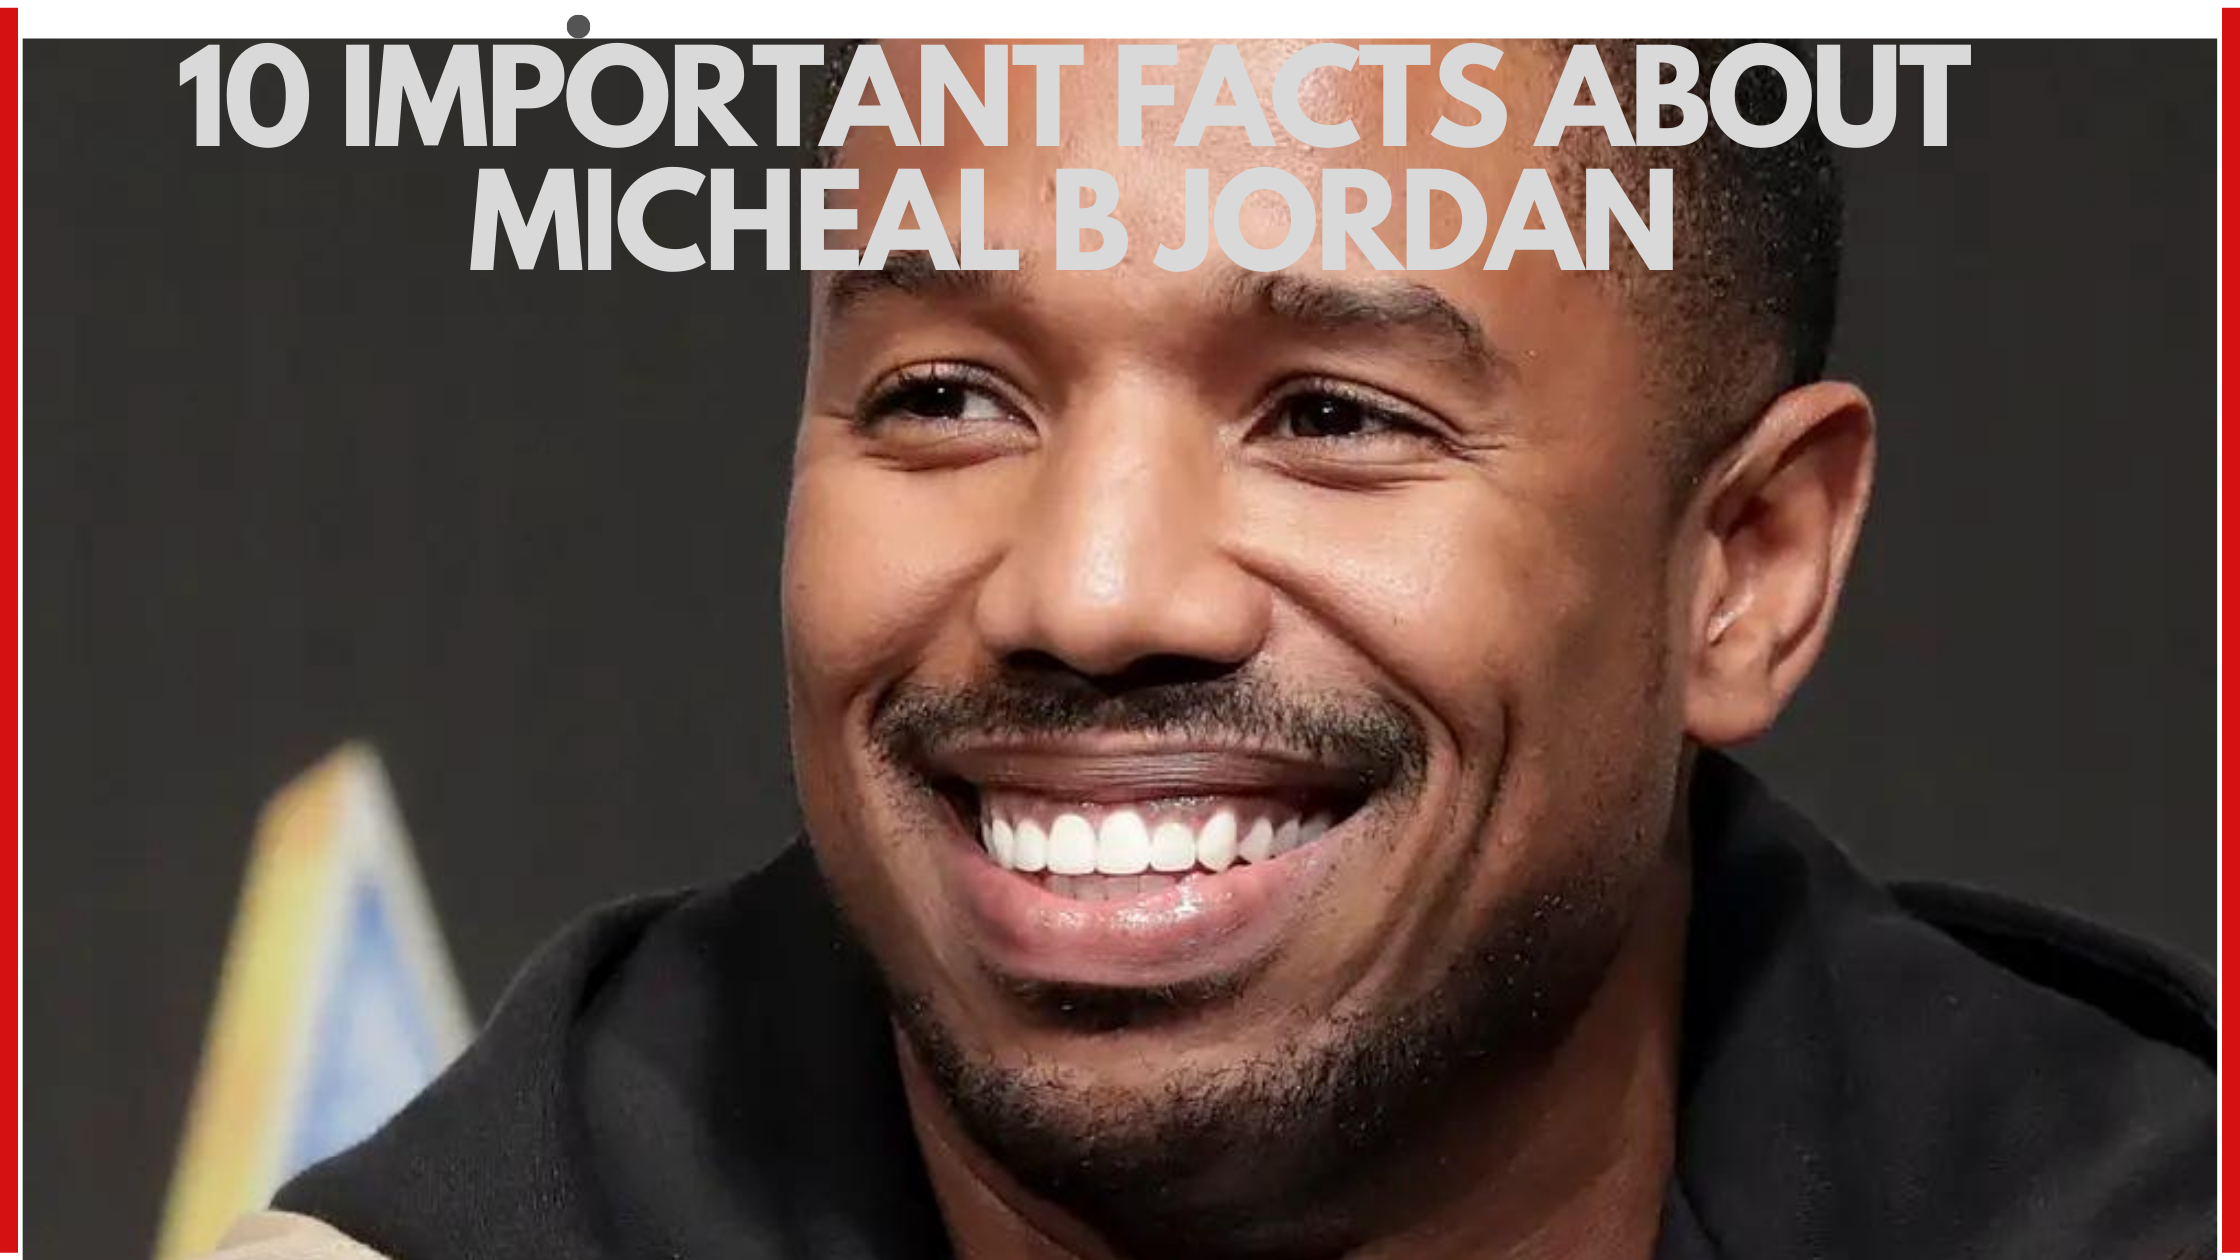 10 Important Facts About Micheal B Jordan